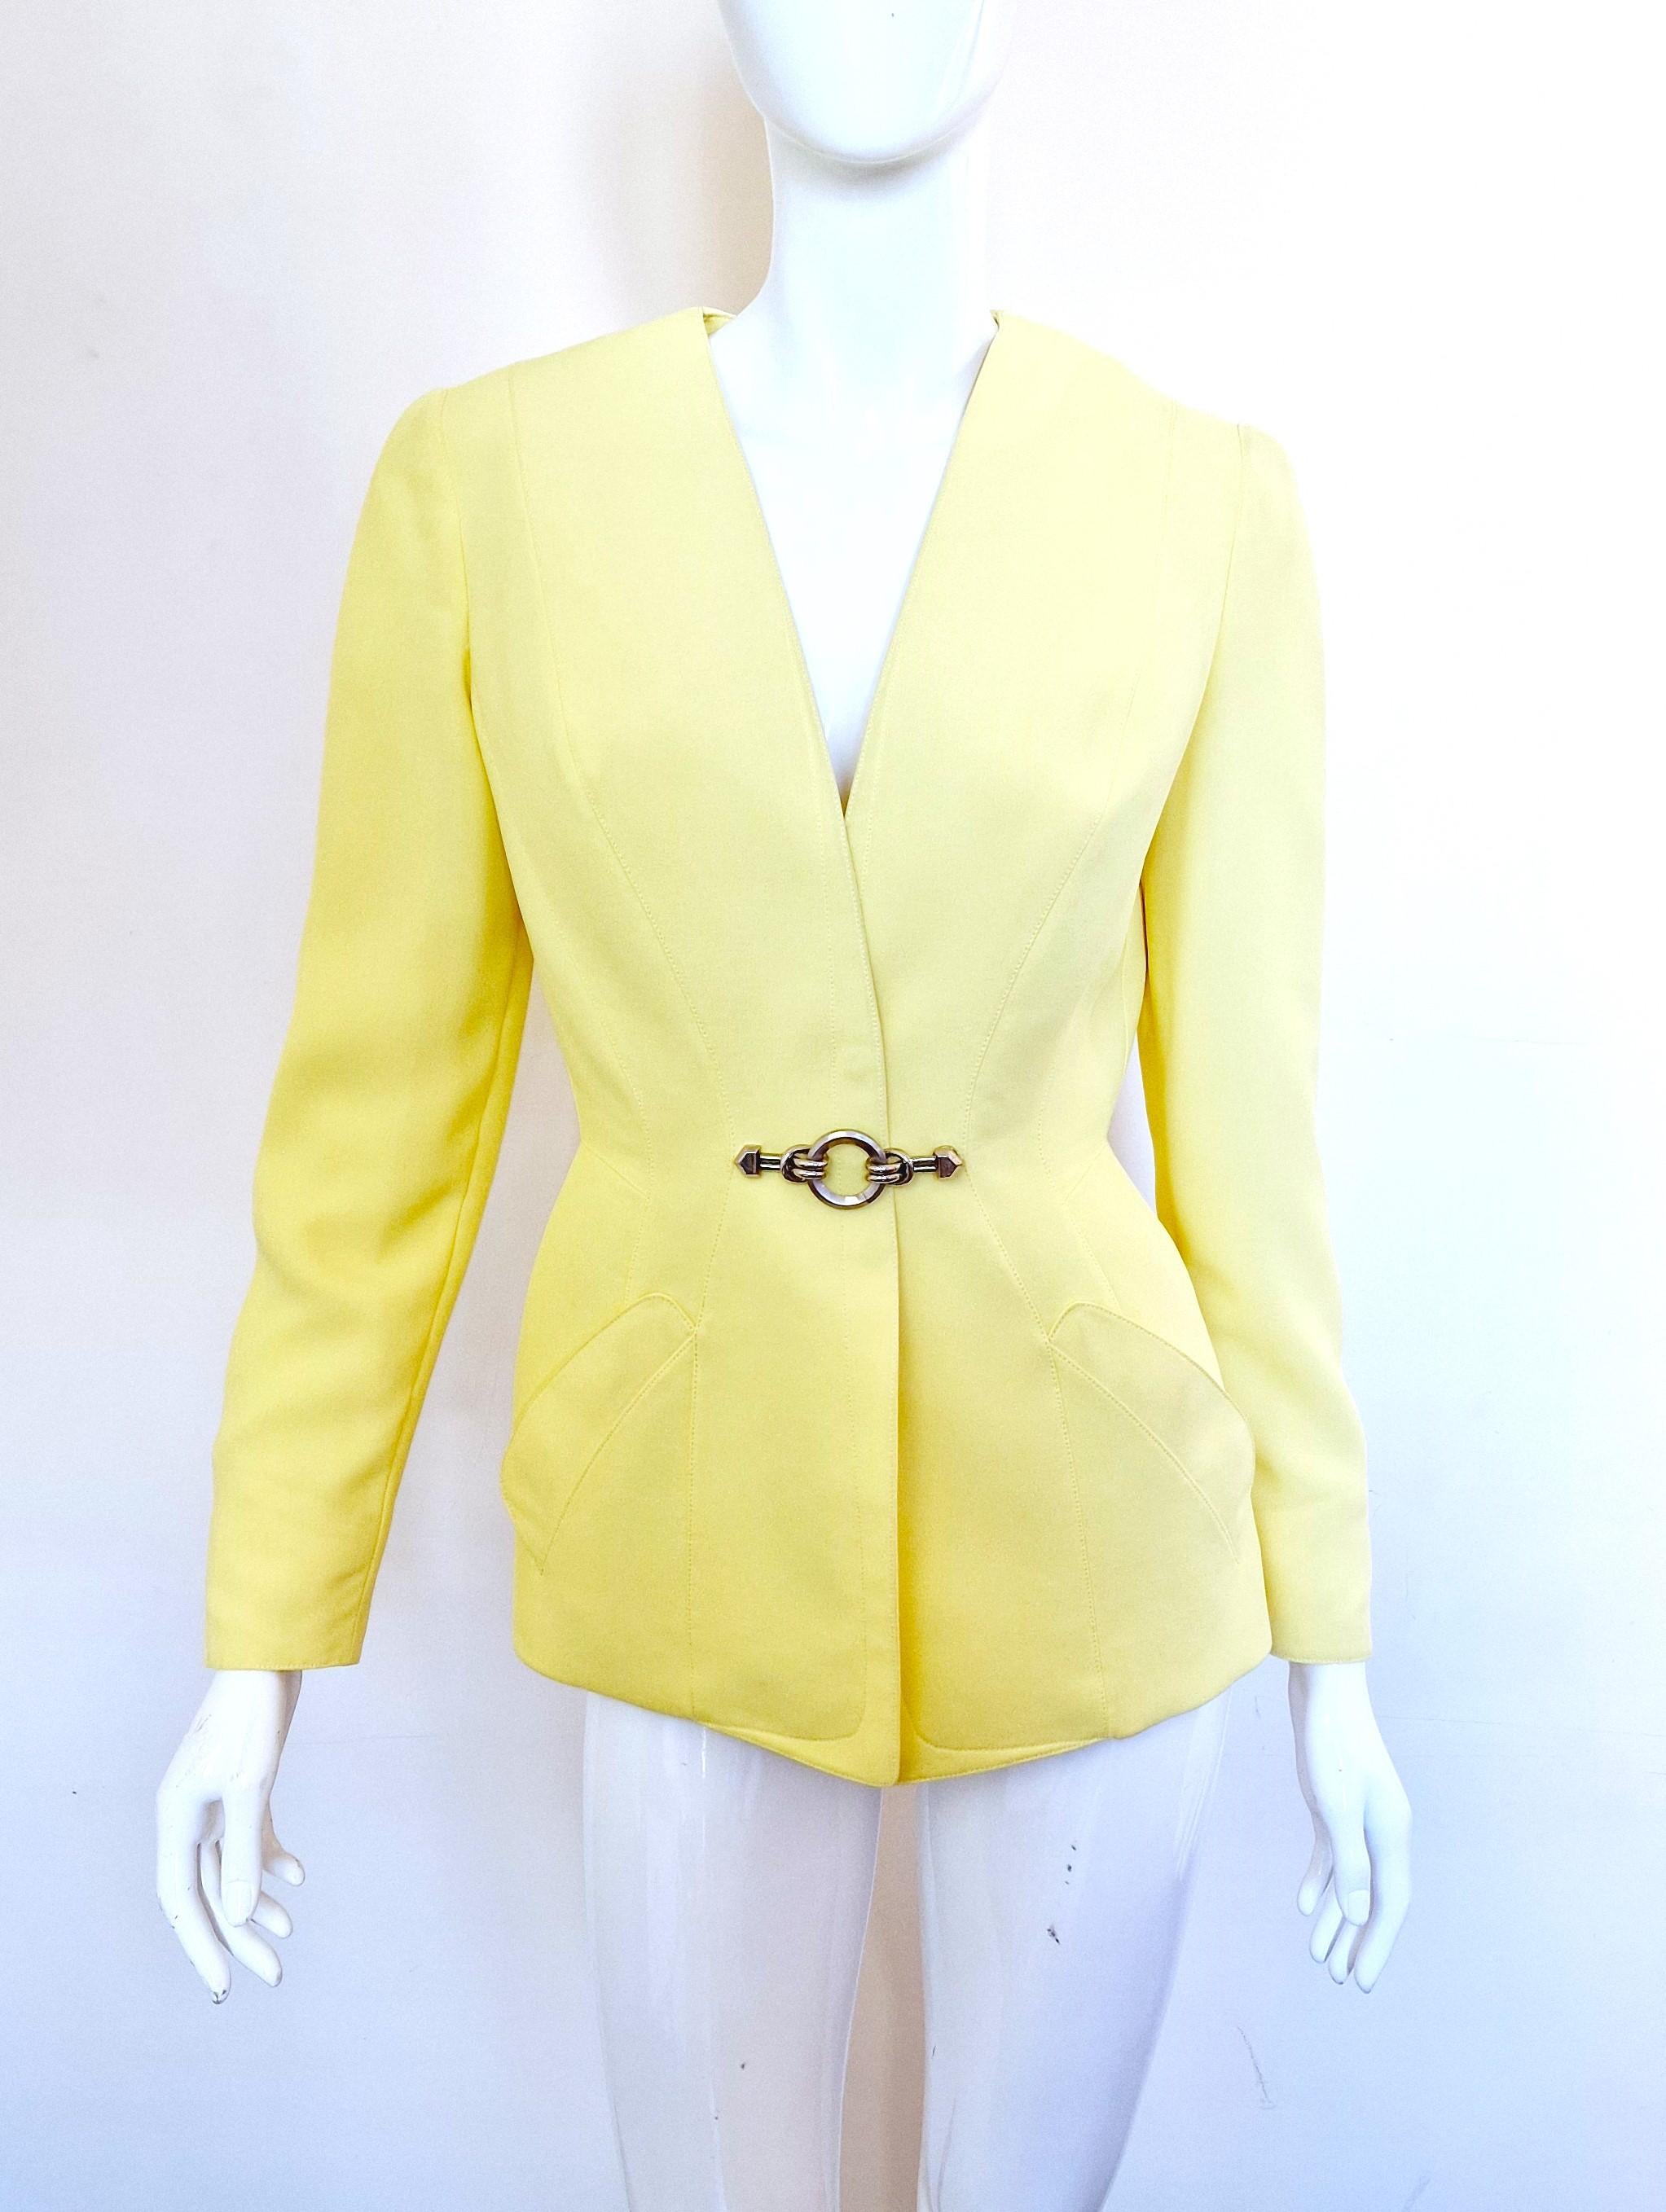 Chain jacket by Thierry Mugler!
Massive metal chain closure!
With shoulder pads!

EXCELLENT condition! The inner liner has light discoloration at the armpits (please, see last photo), but these are not visible when you wear it. Otherwise, like new